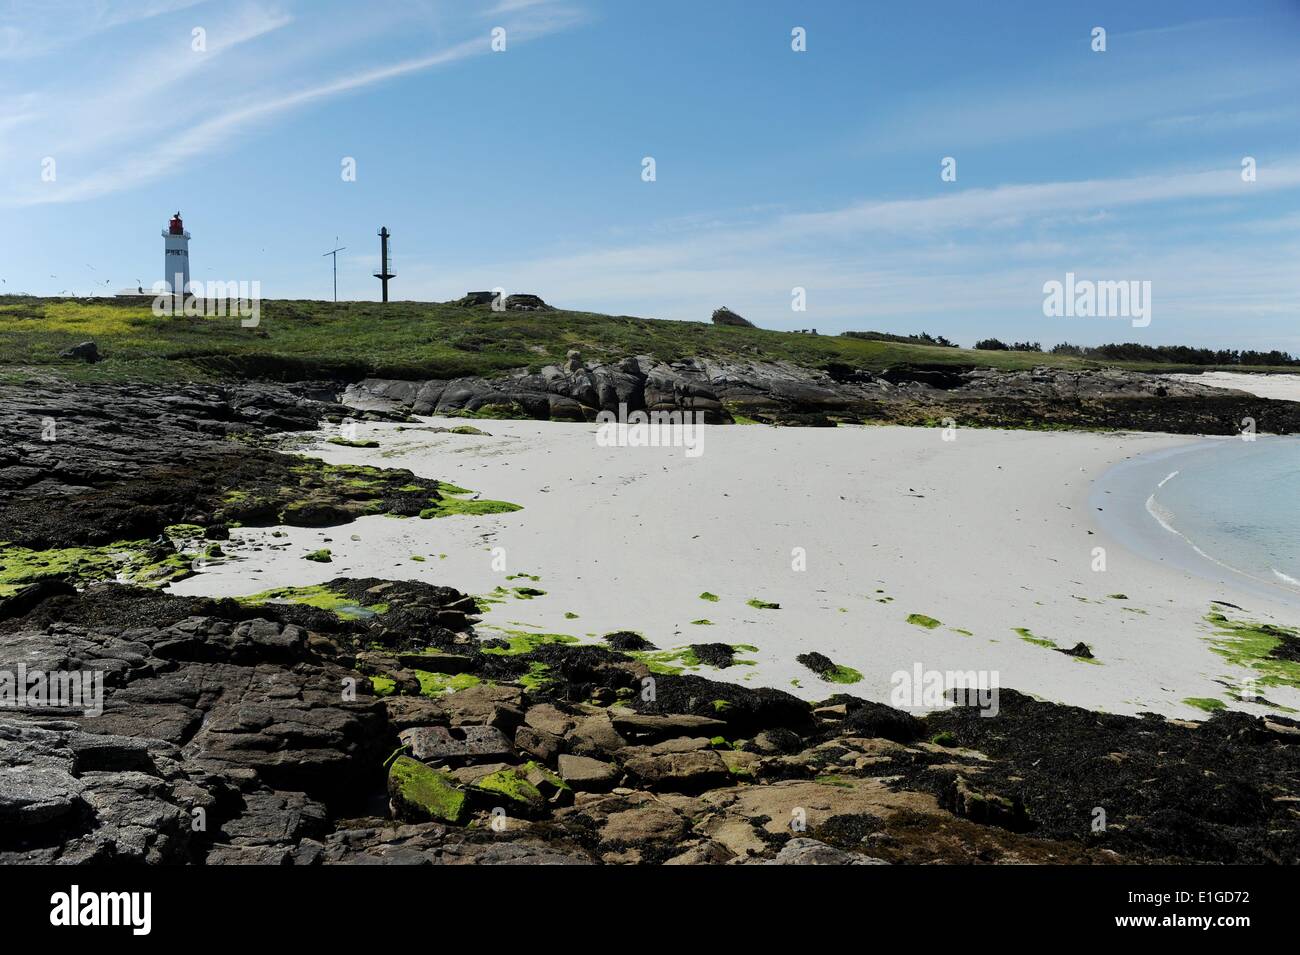 Isle Penfret, one of the Glénan islands (French: Îles des Glénan or Archipel des Glénan, Breton: Inizi Glenan) which are an archipelago located off the coast of France. Finistere, Brittany, France, 28.May 2014. Photo: Frank May/picture alliance Stock Photo